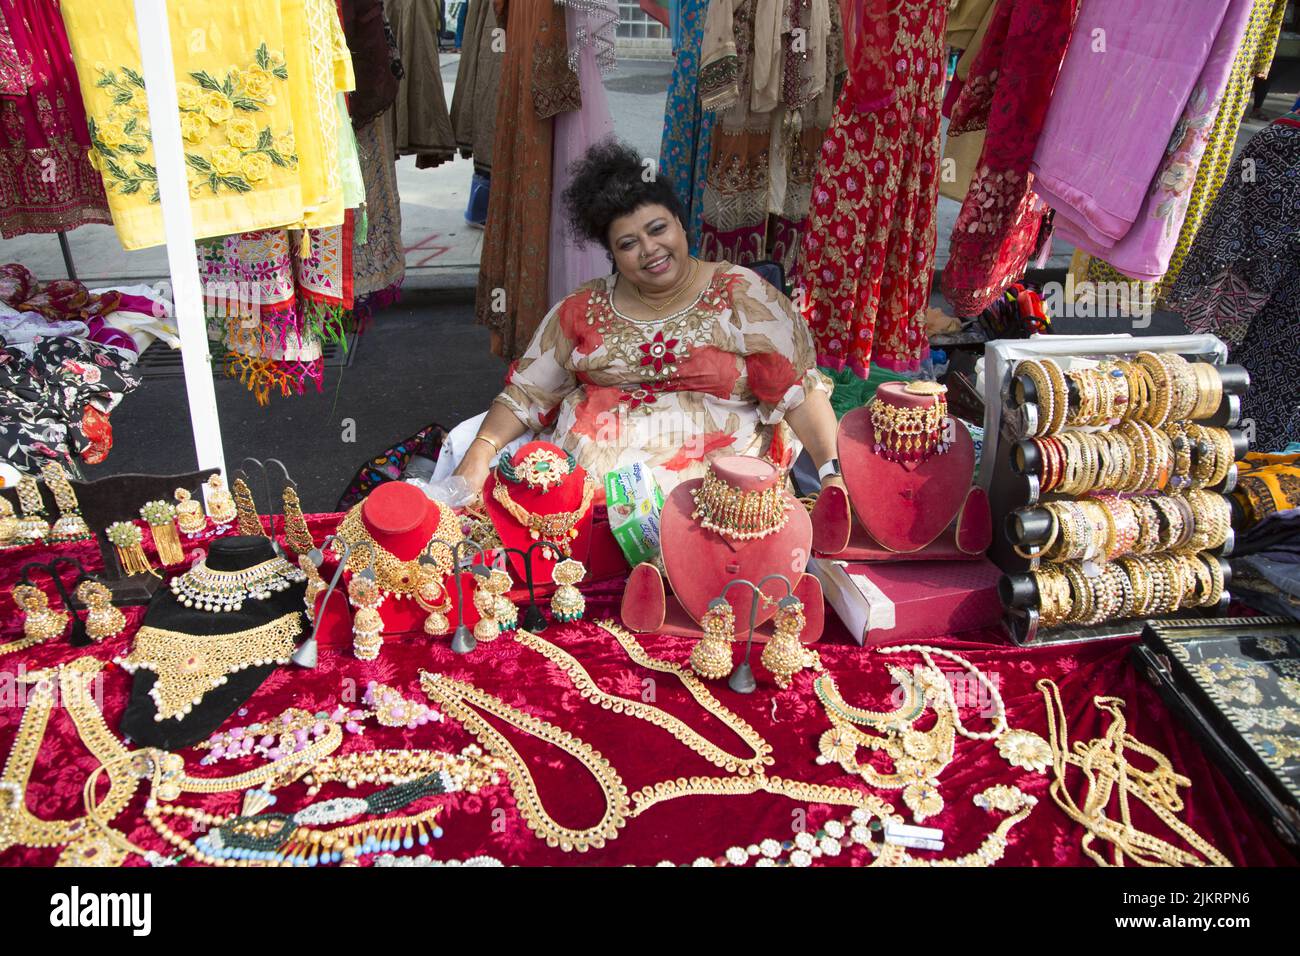 Woman sells women's clothing and jewelry at a Bangladeshi street fair on Church Avenue in the multiethnic, multicultural Kensington neighborhood of Brooklyn, New York. Stock Photo